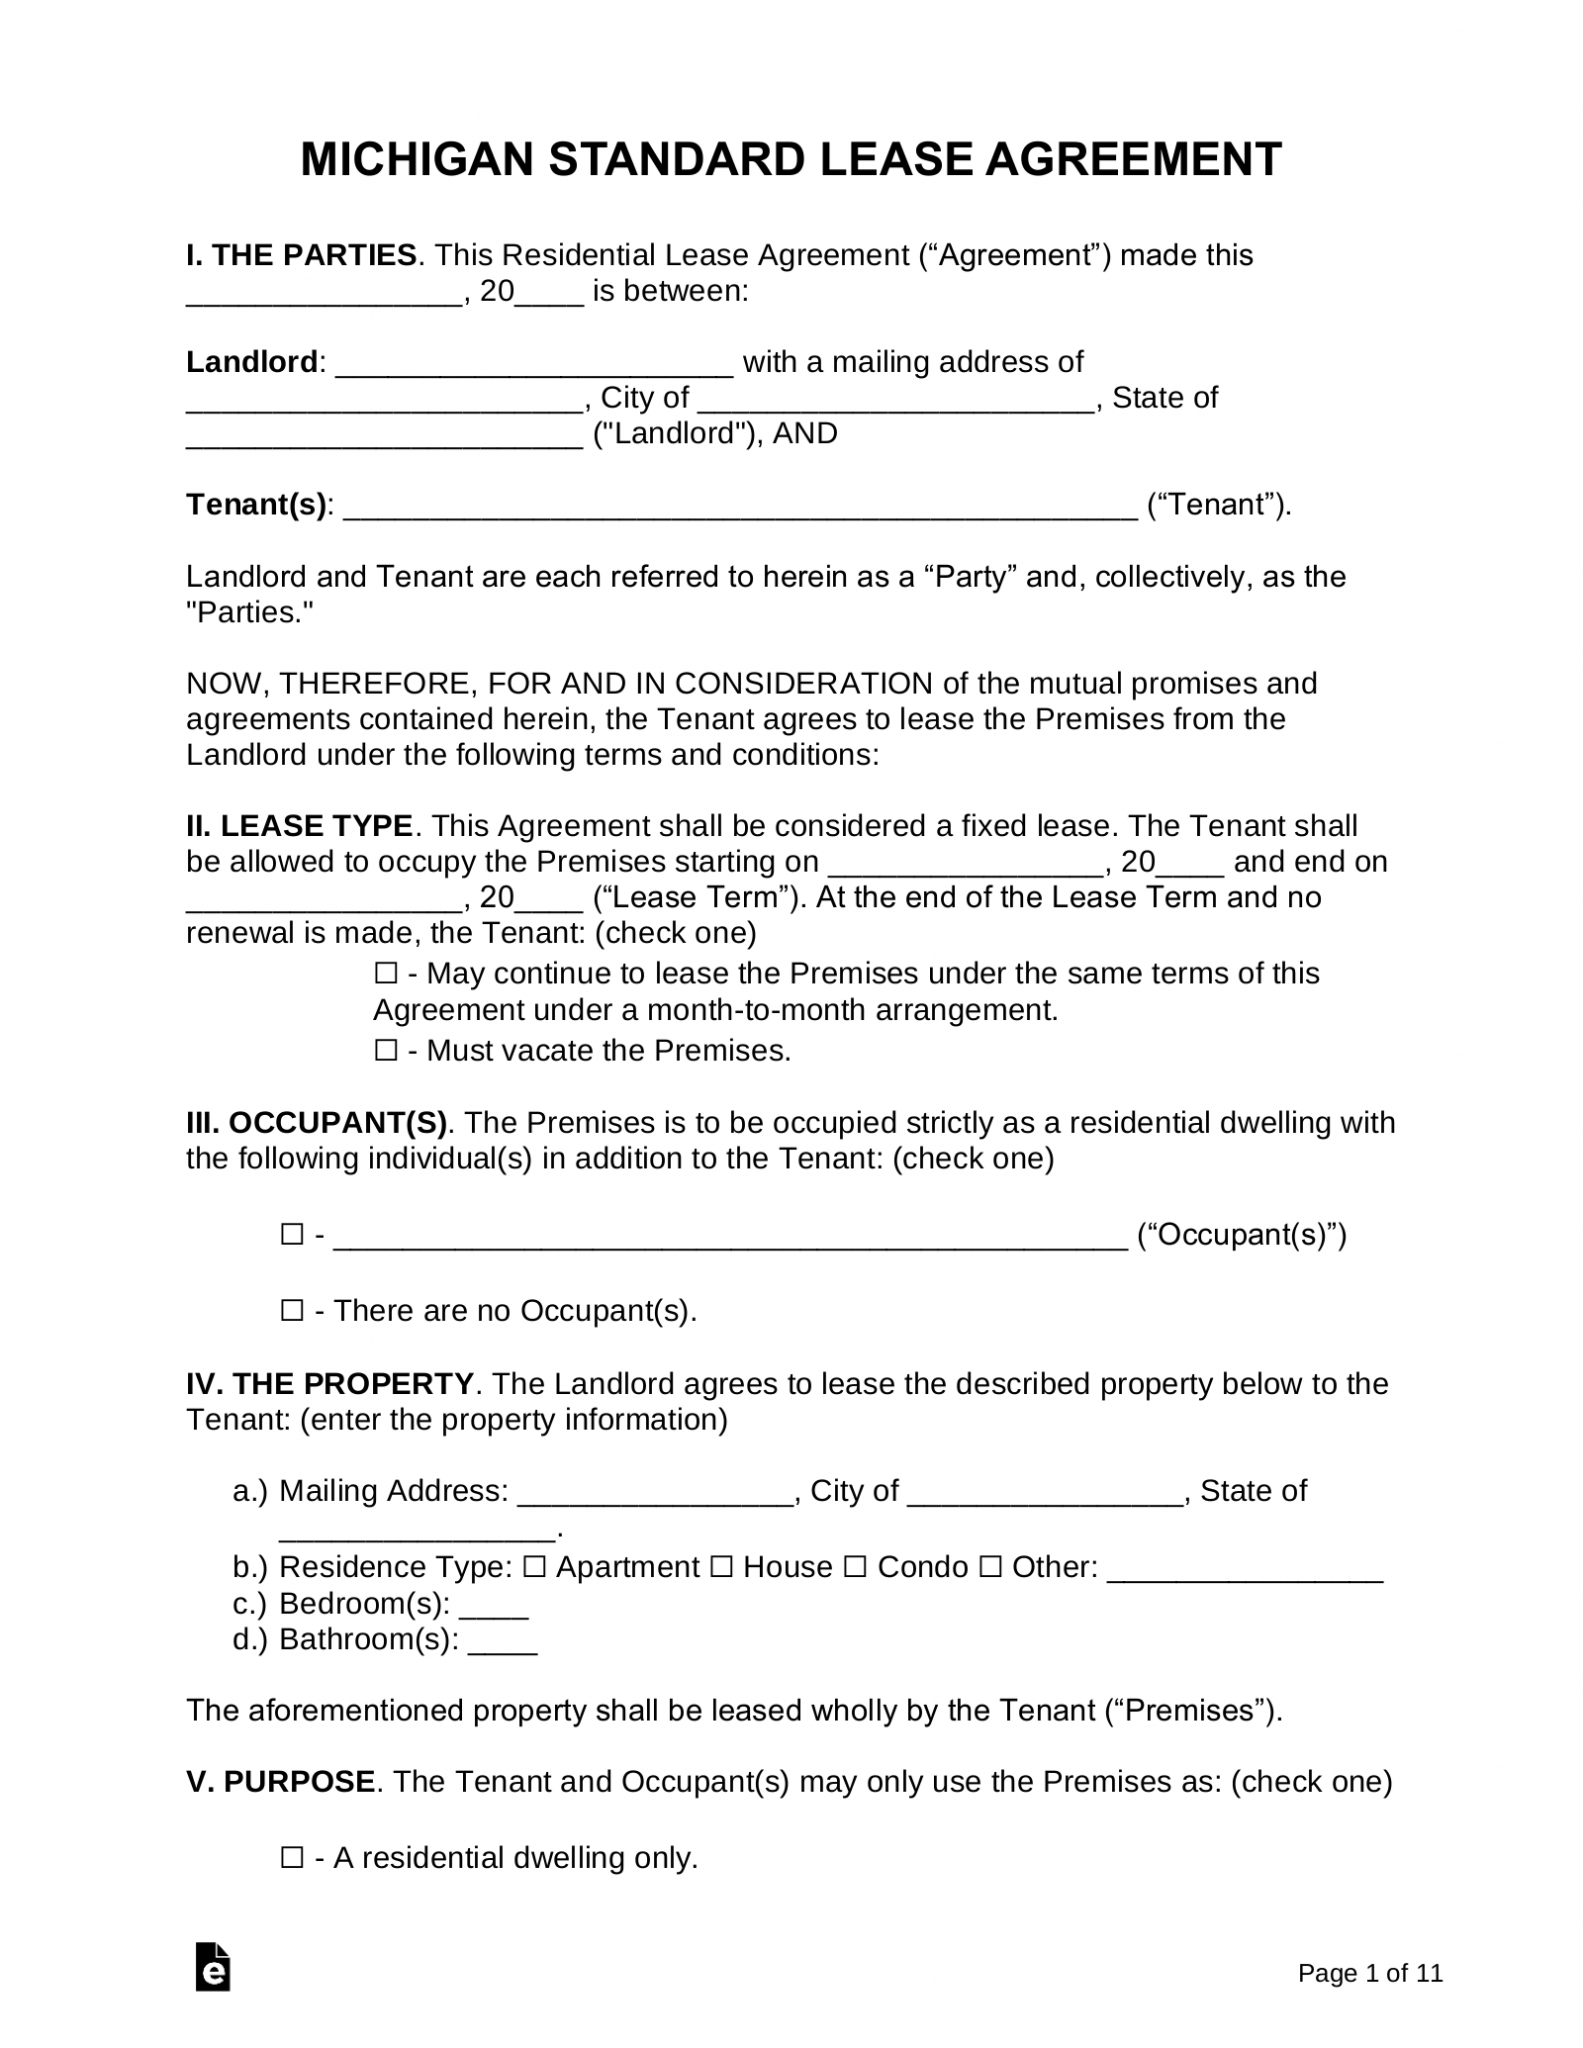 free-michigan-residential-lease-agreement-template-pdf-word-eforms